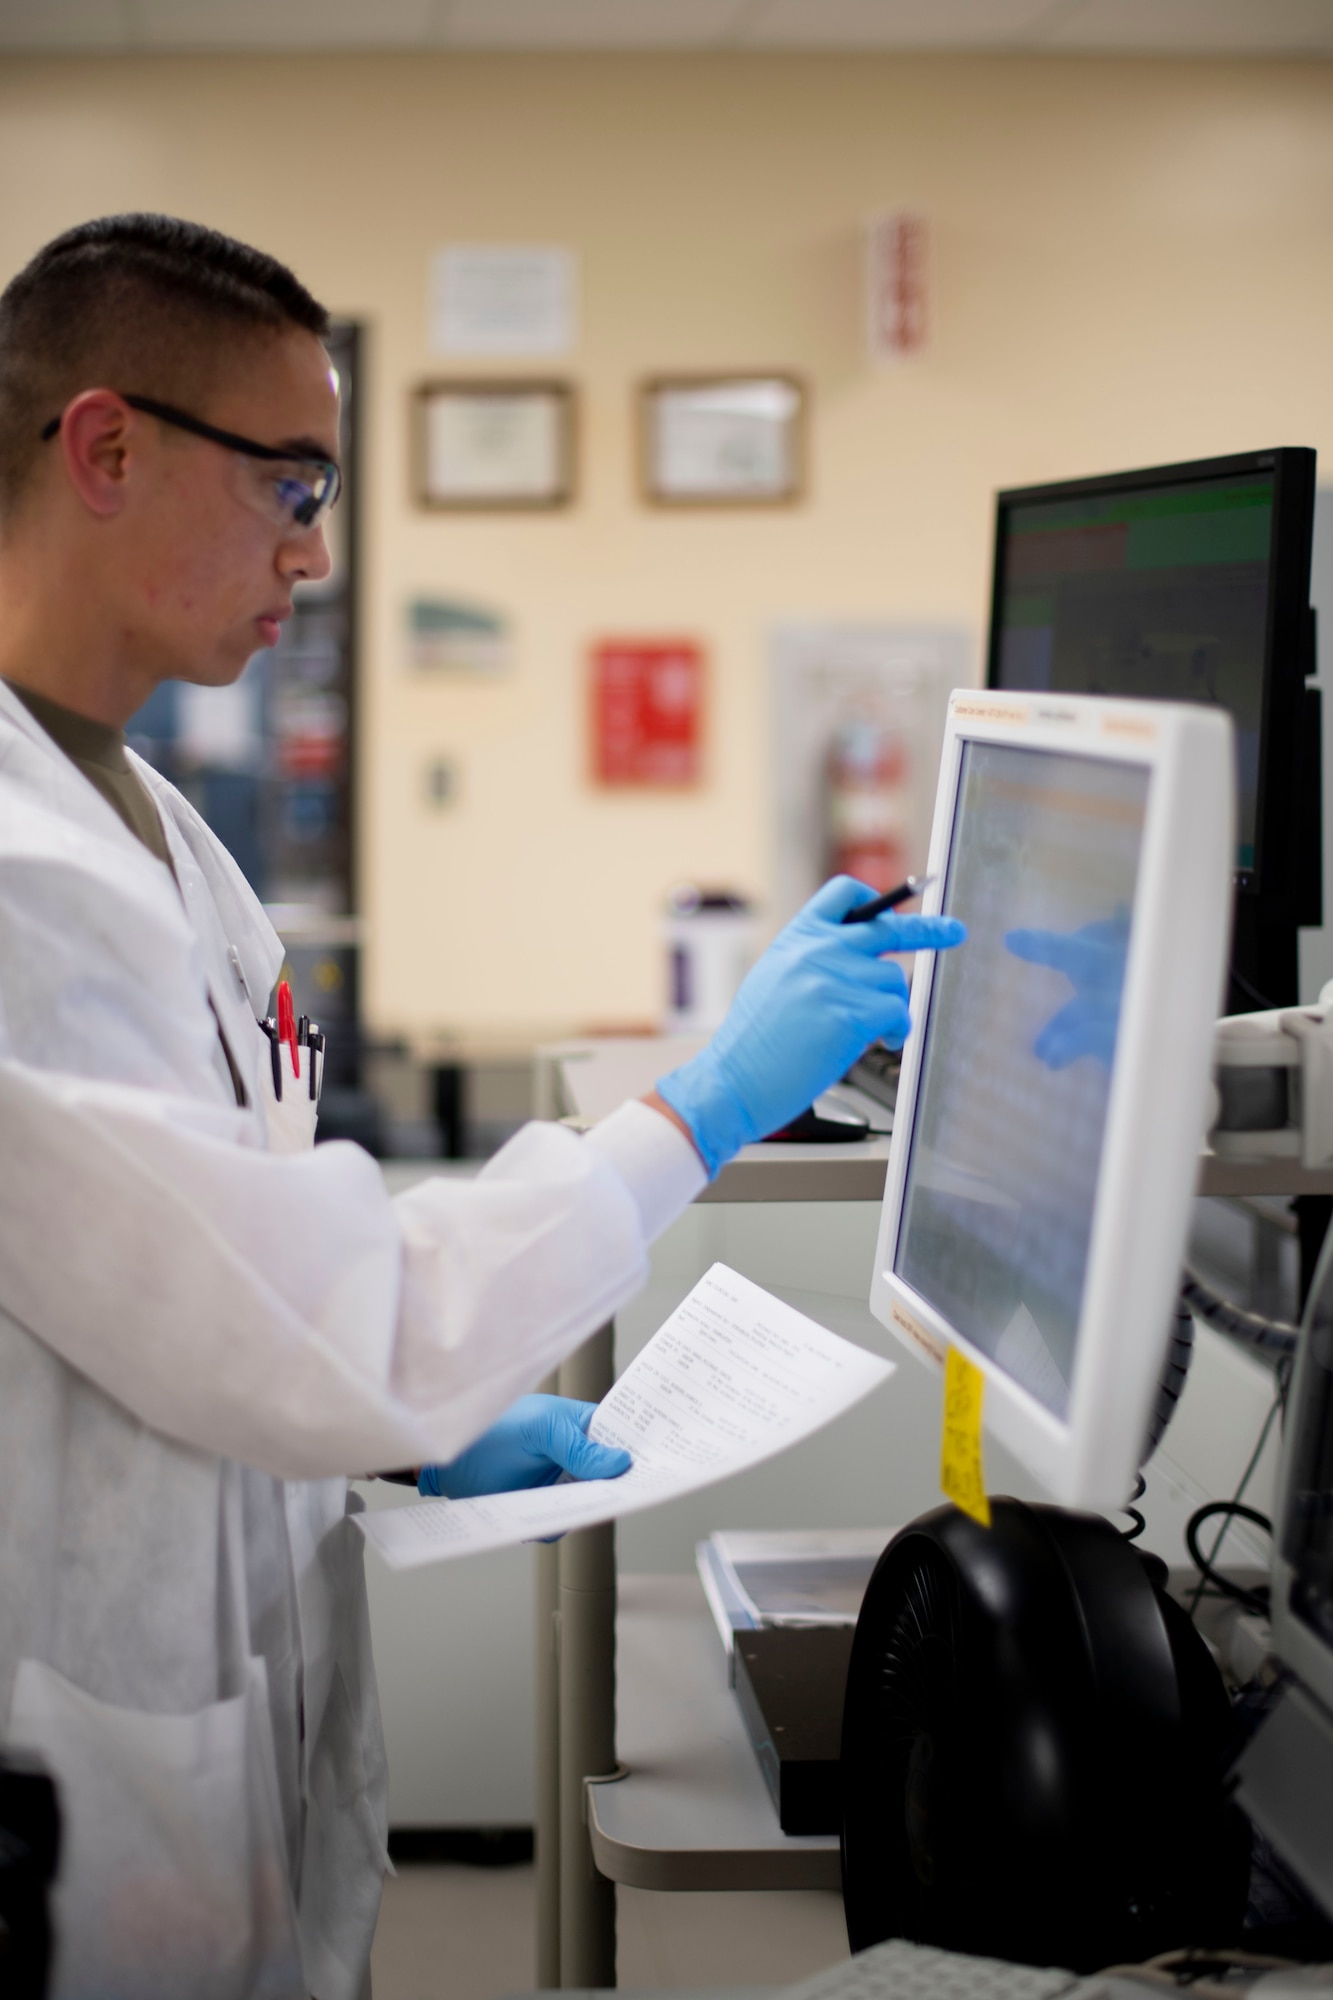 U.S. Air Force Staff Sgt. Eric Crandell, 60th Medical and Diagnostics Therapeutic Squadron Laboratory technician, reviews data on a monitor April 4, 2019, at Travis Air Force Base, California. David Grant USAF Medical Center operates the Air Force’s larges clinical laboratory, supporting 465 health care providers and 325,000 patients per year. Technicians perform 1.2 million tests annually in chemistry, special chemistry, hematology, coagulation, immunology, microbiology, point-of-care testing, histology, cytology and transfusion services. (U.S. Air Force photo by Airman 1st Class Jonathon Carnell)